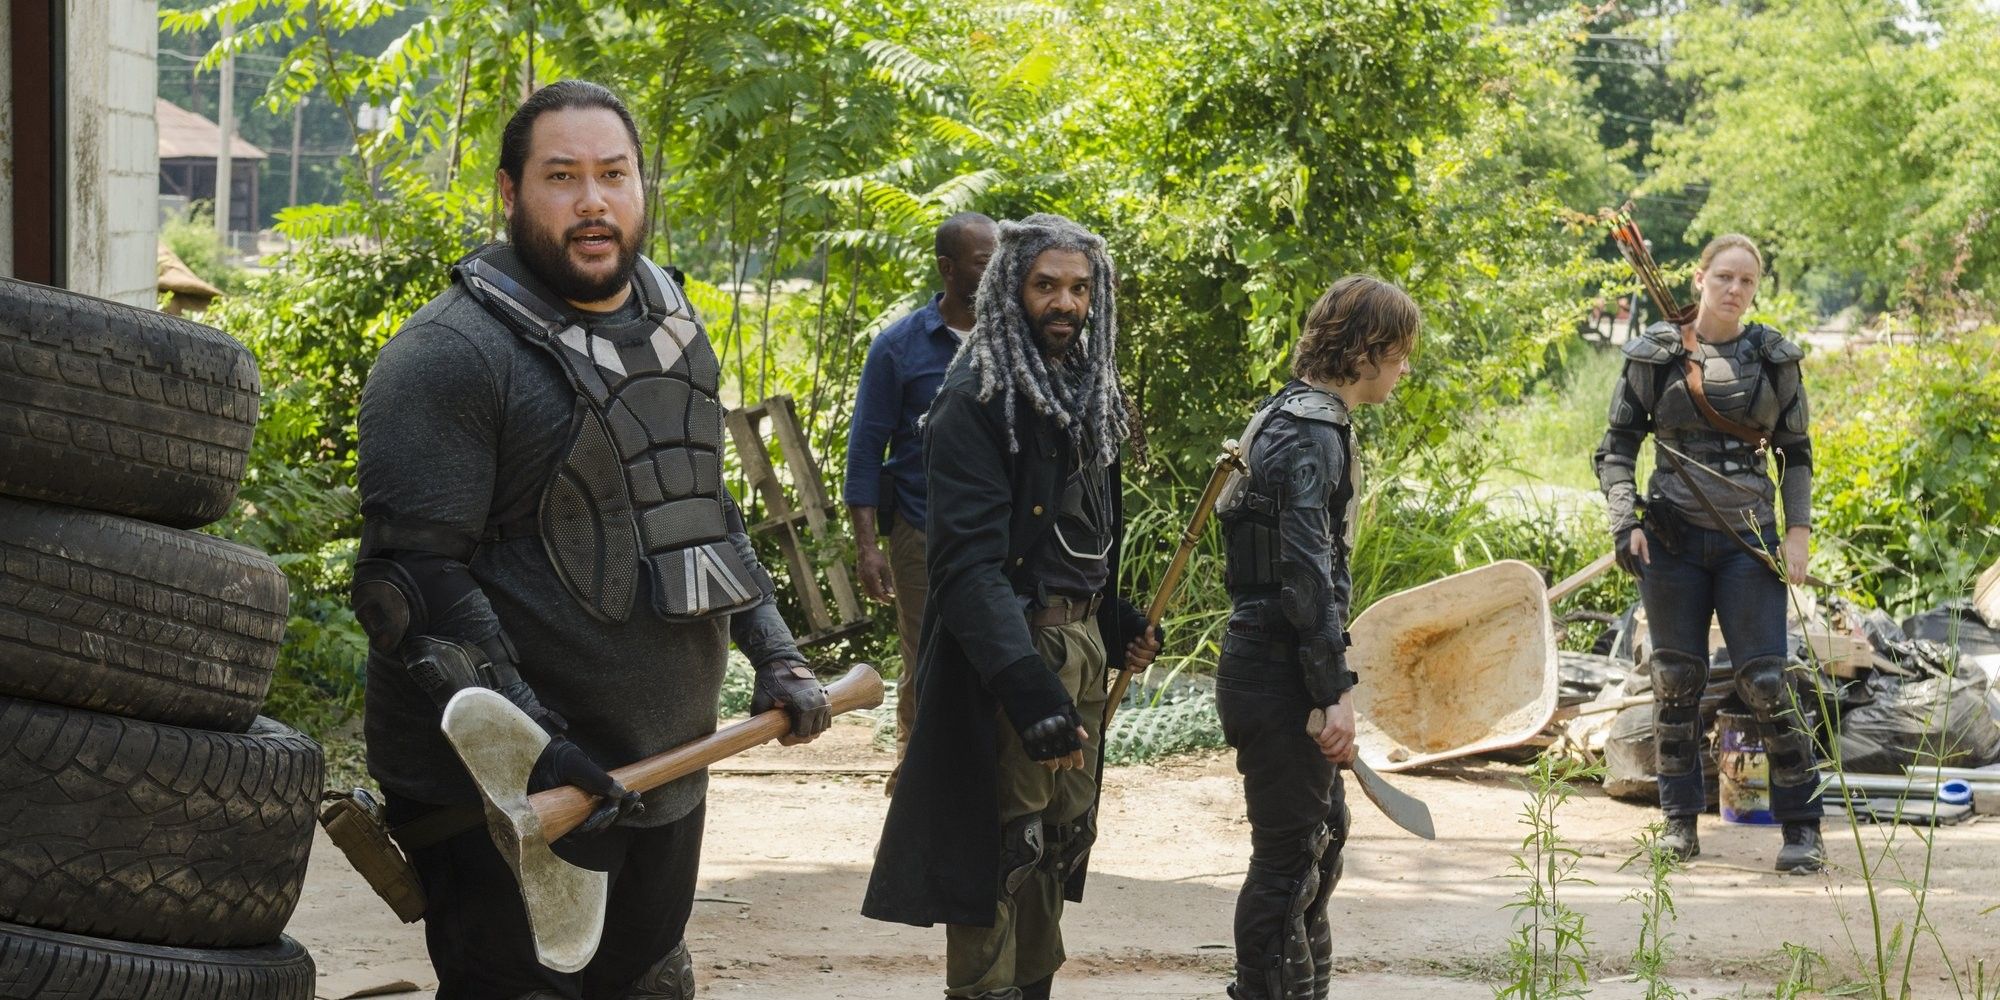 Cooper Andrews as Jerry and Khary Payton as Ezekiel in The Walking Dead